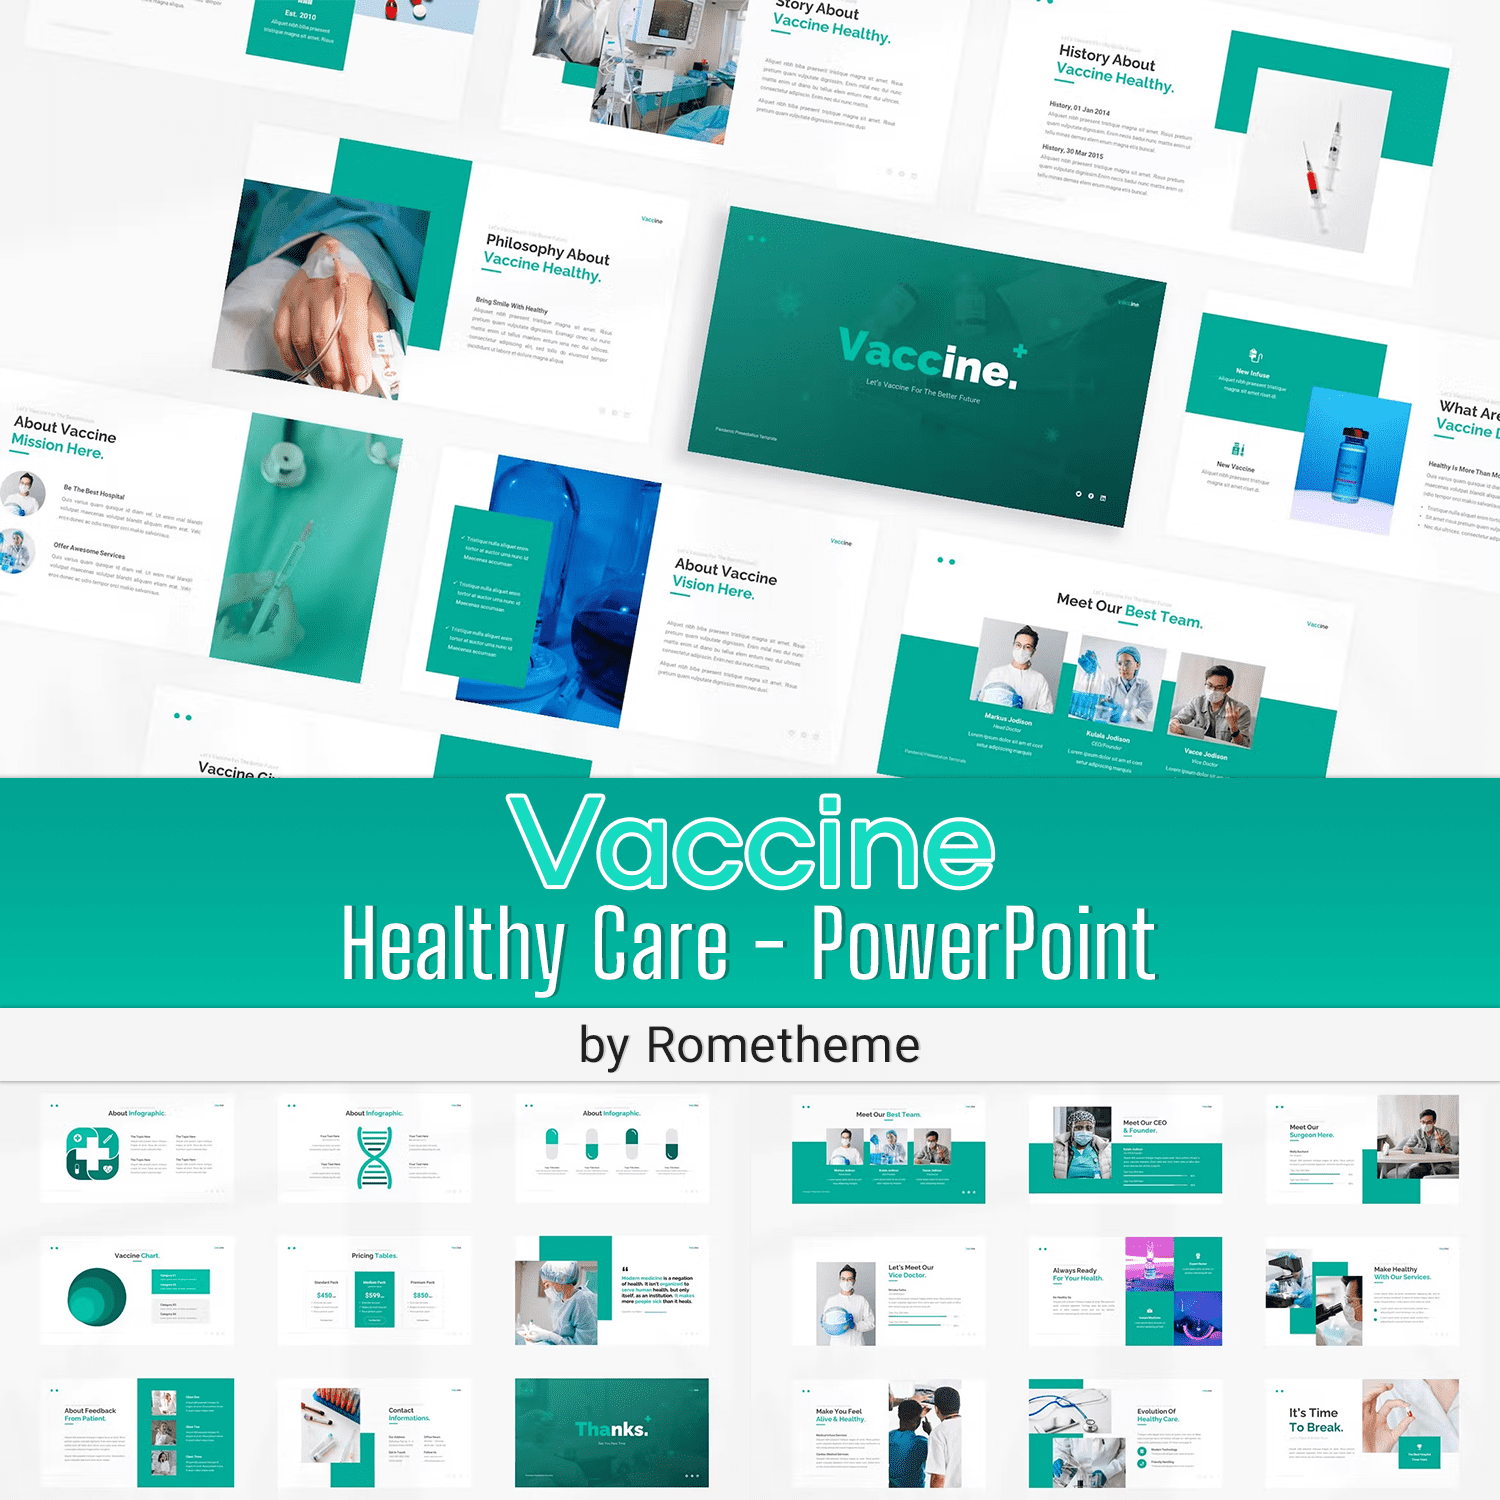 Vaccine Healthy Care - PowerPoint.